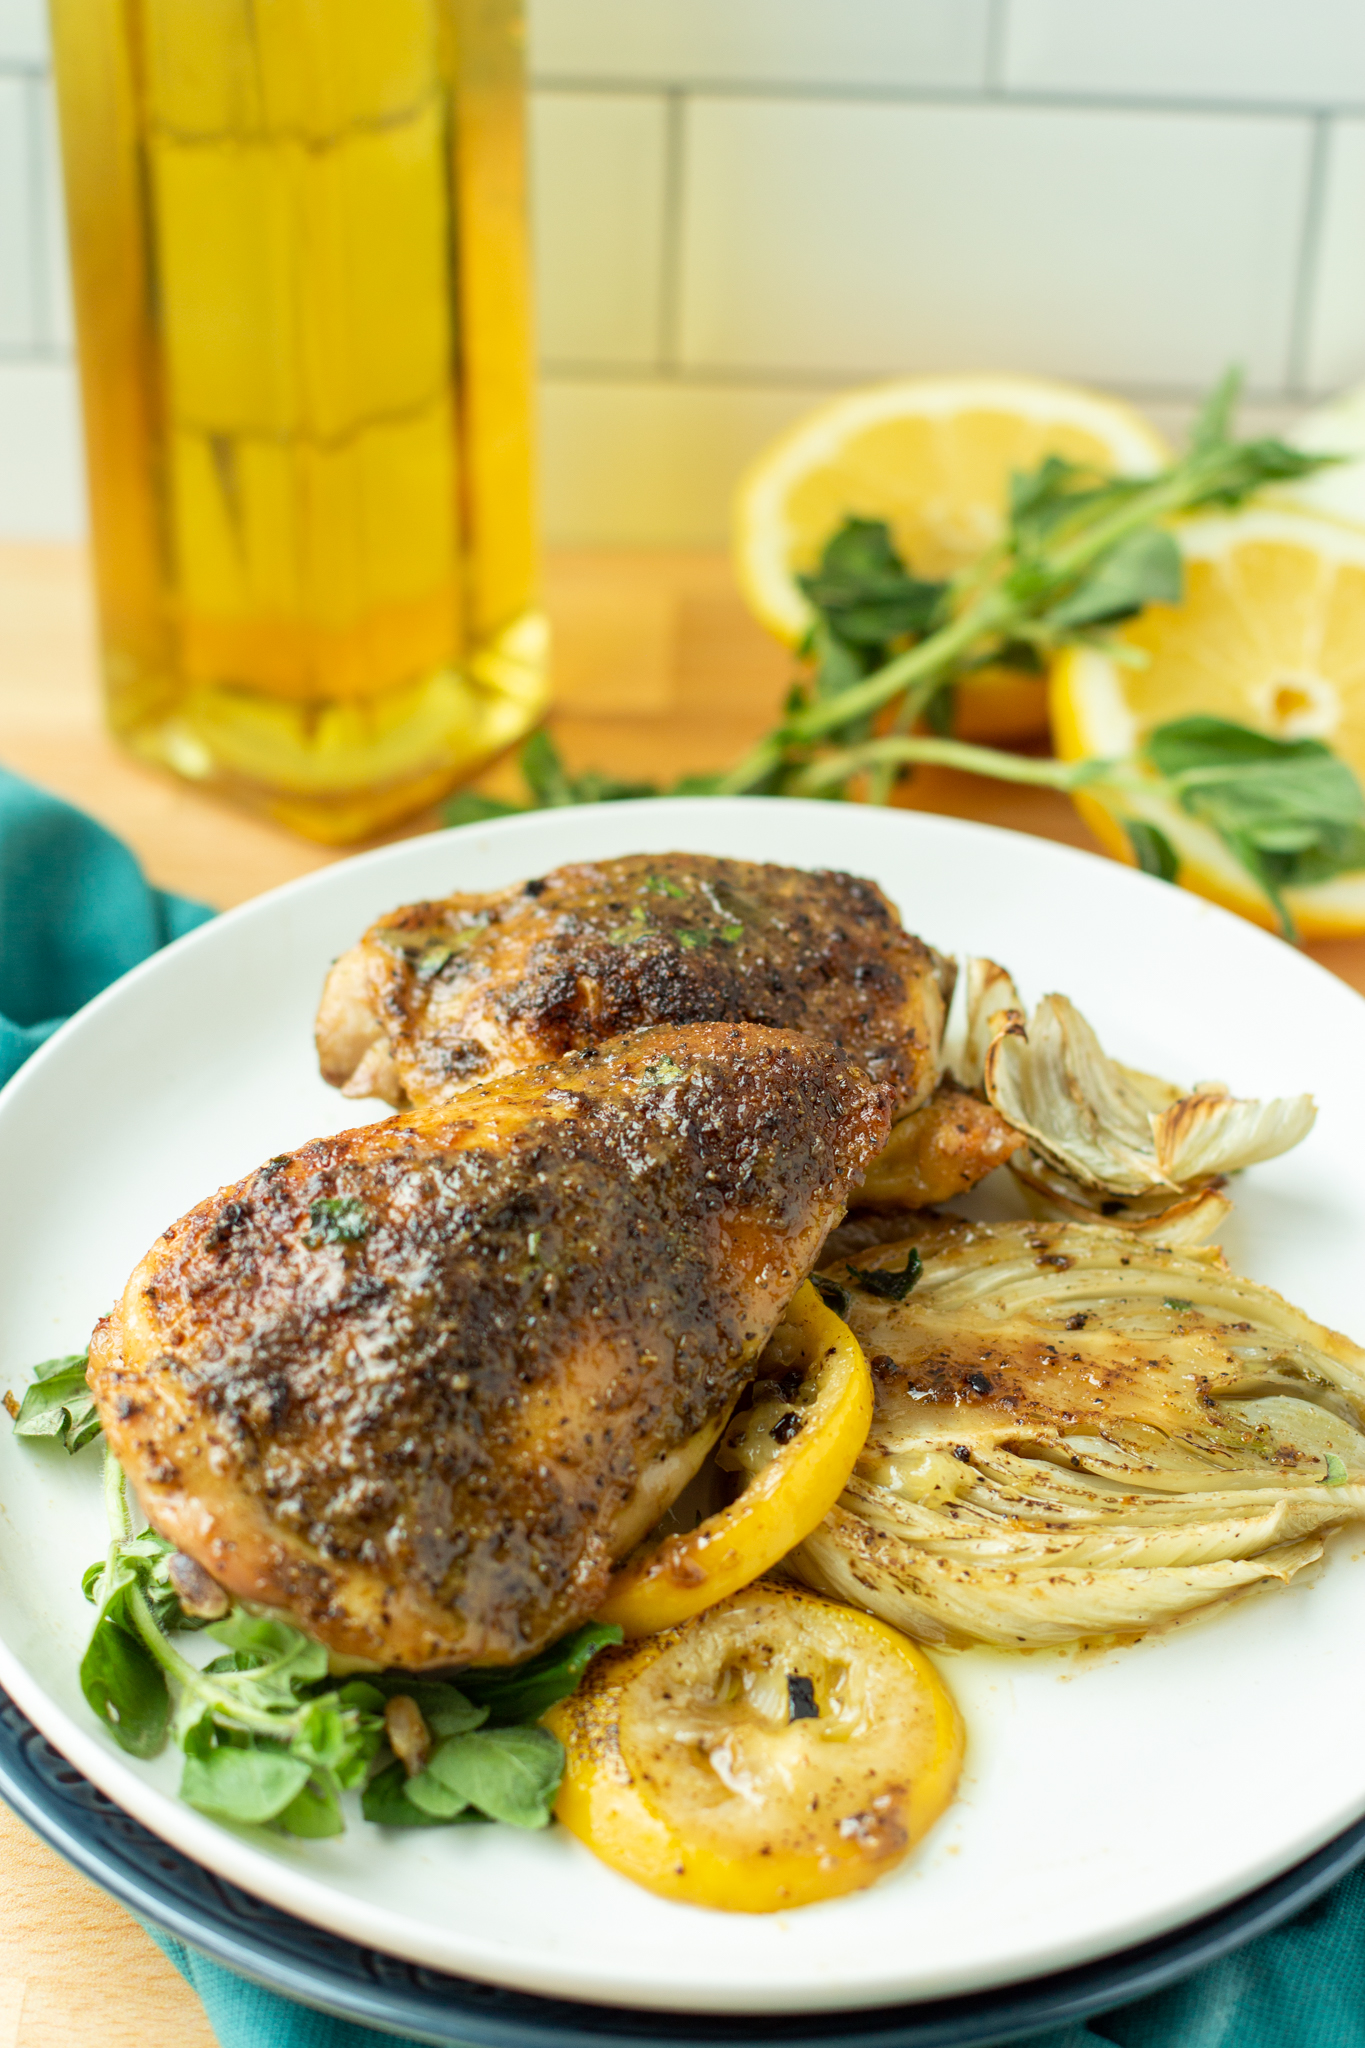 A photo of roasted chicken thighs on a plate with roasted fennel, lemon and olive oil in the background